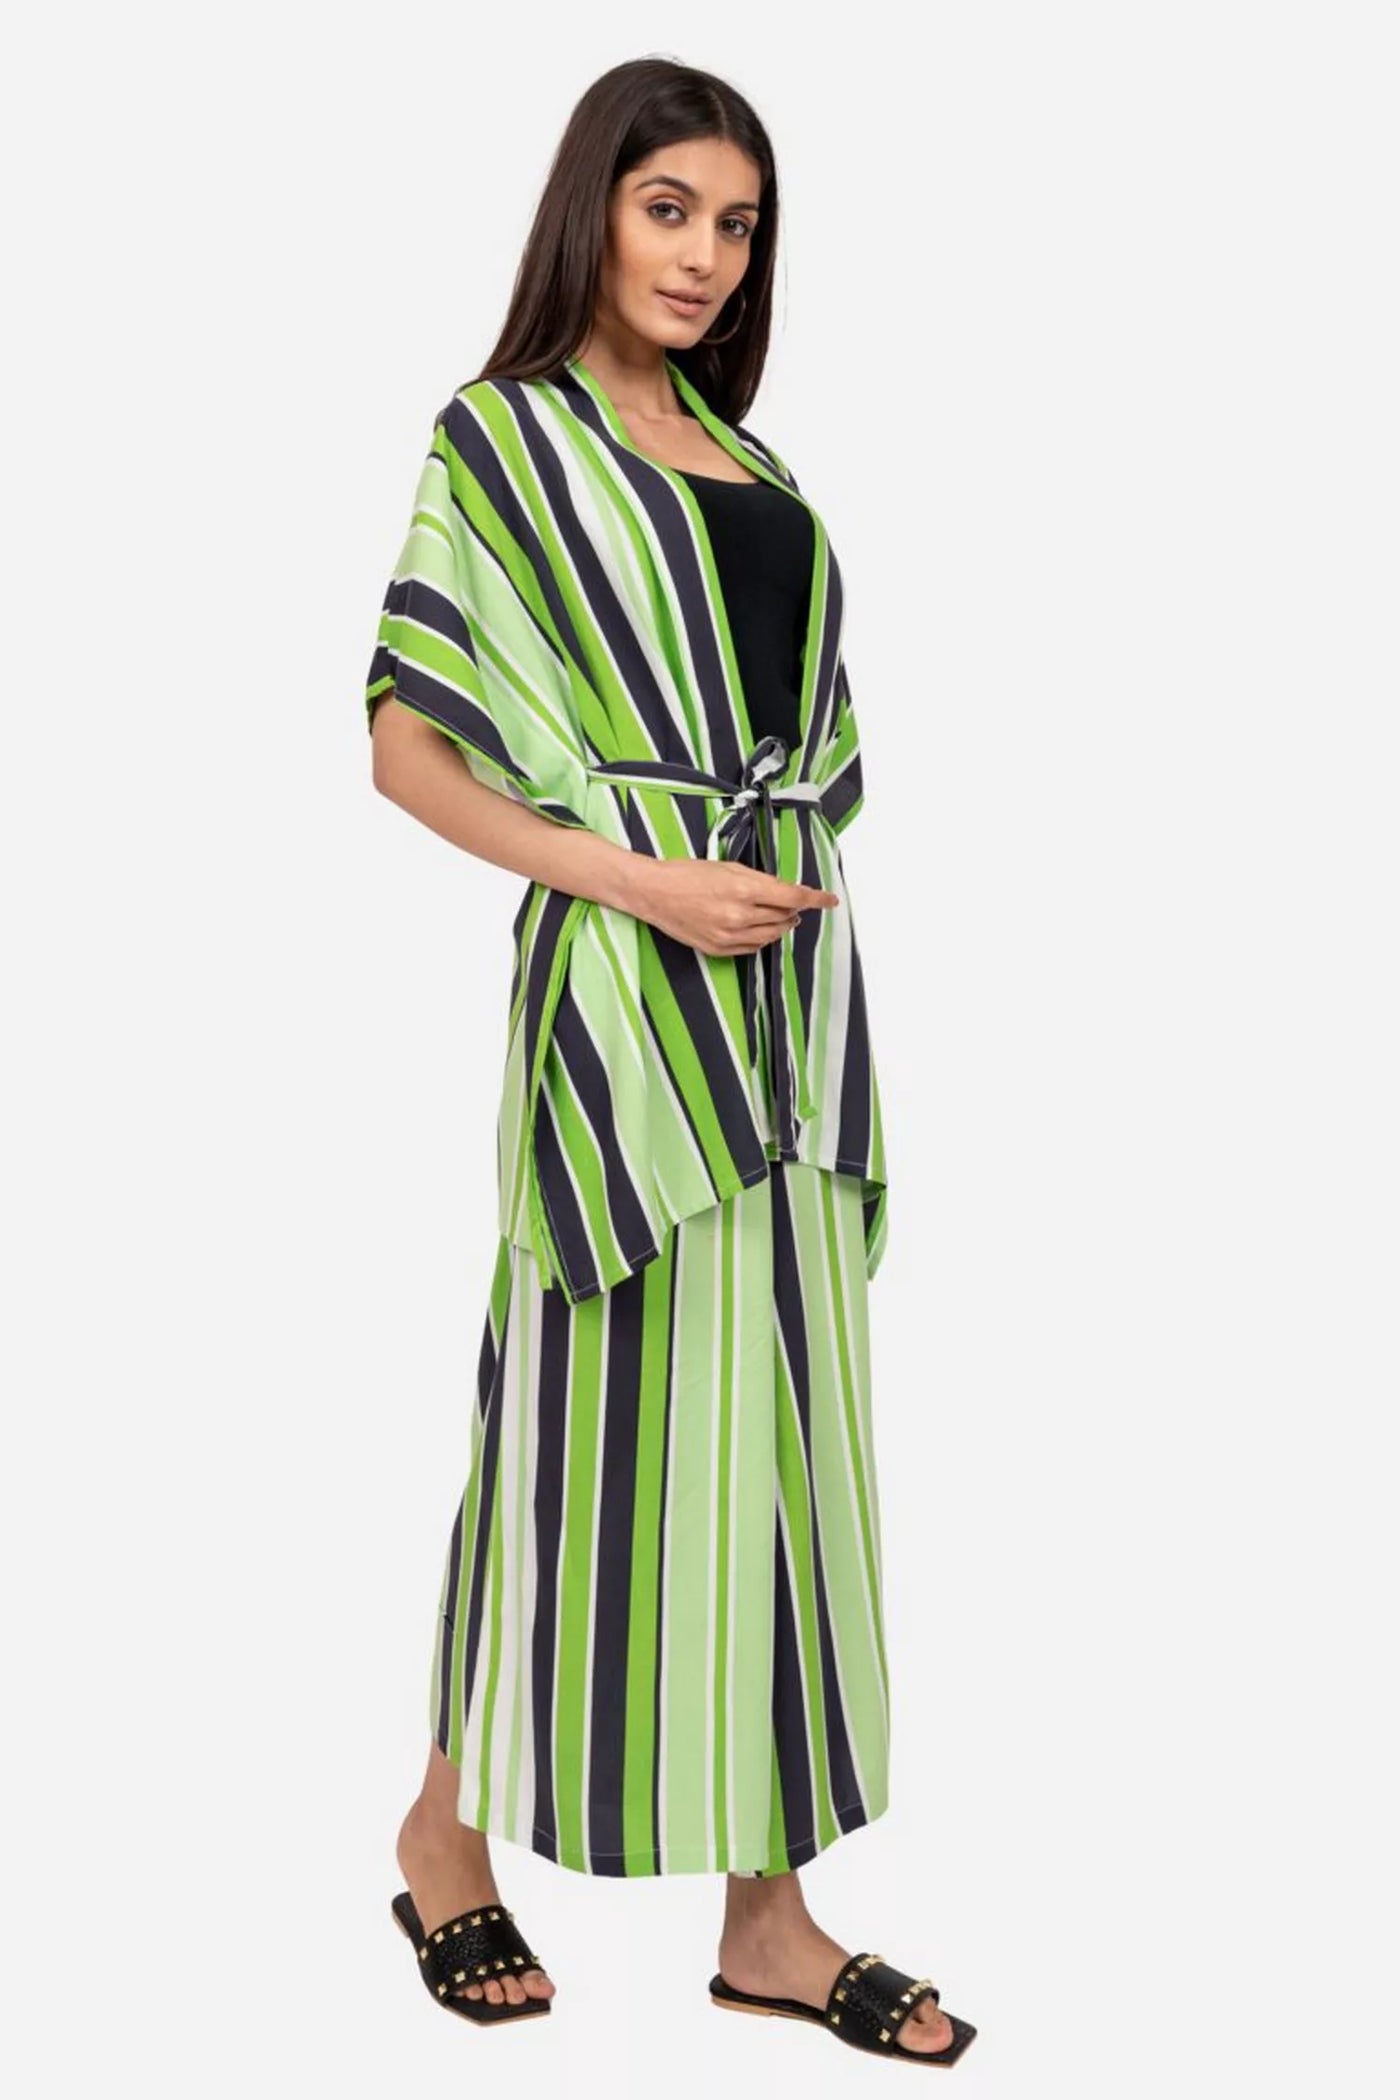 GREEN AND BLACK STRIPED COORD SET